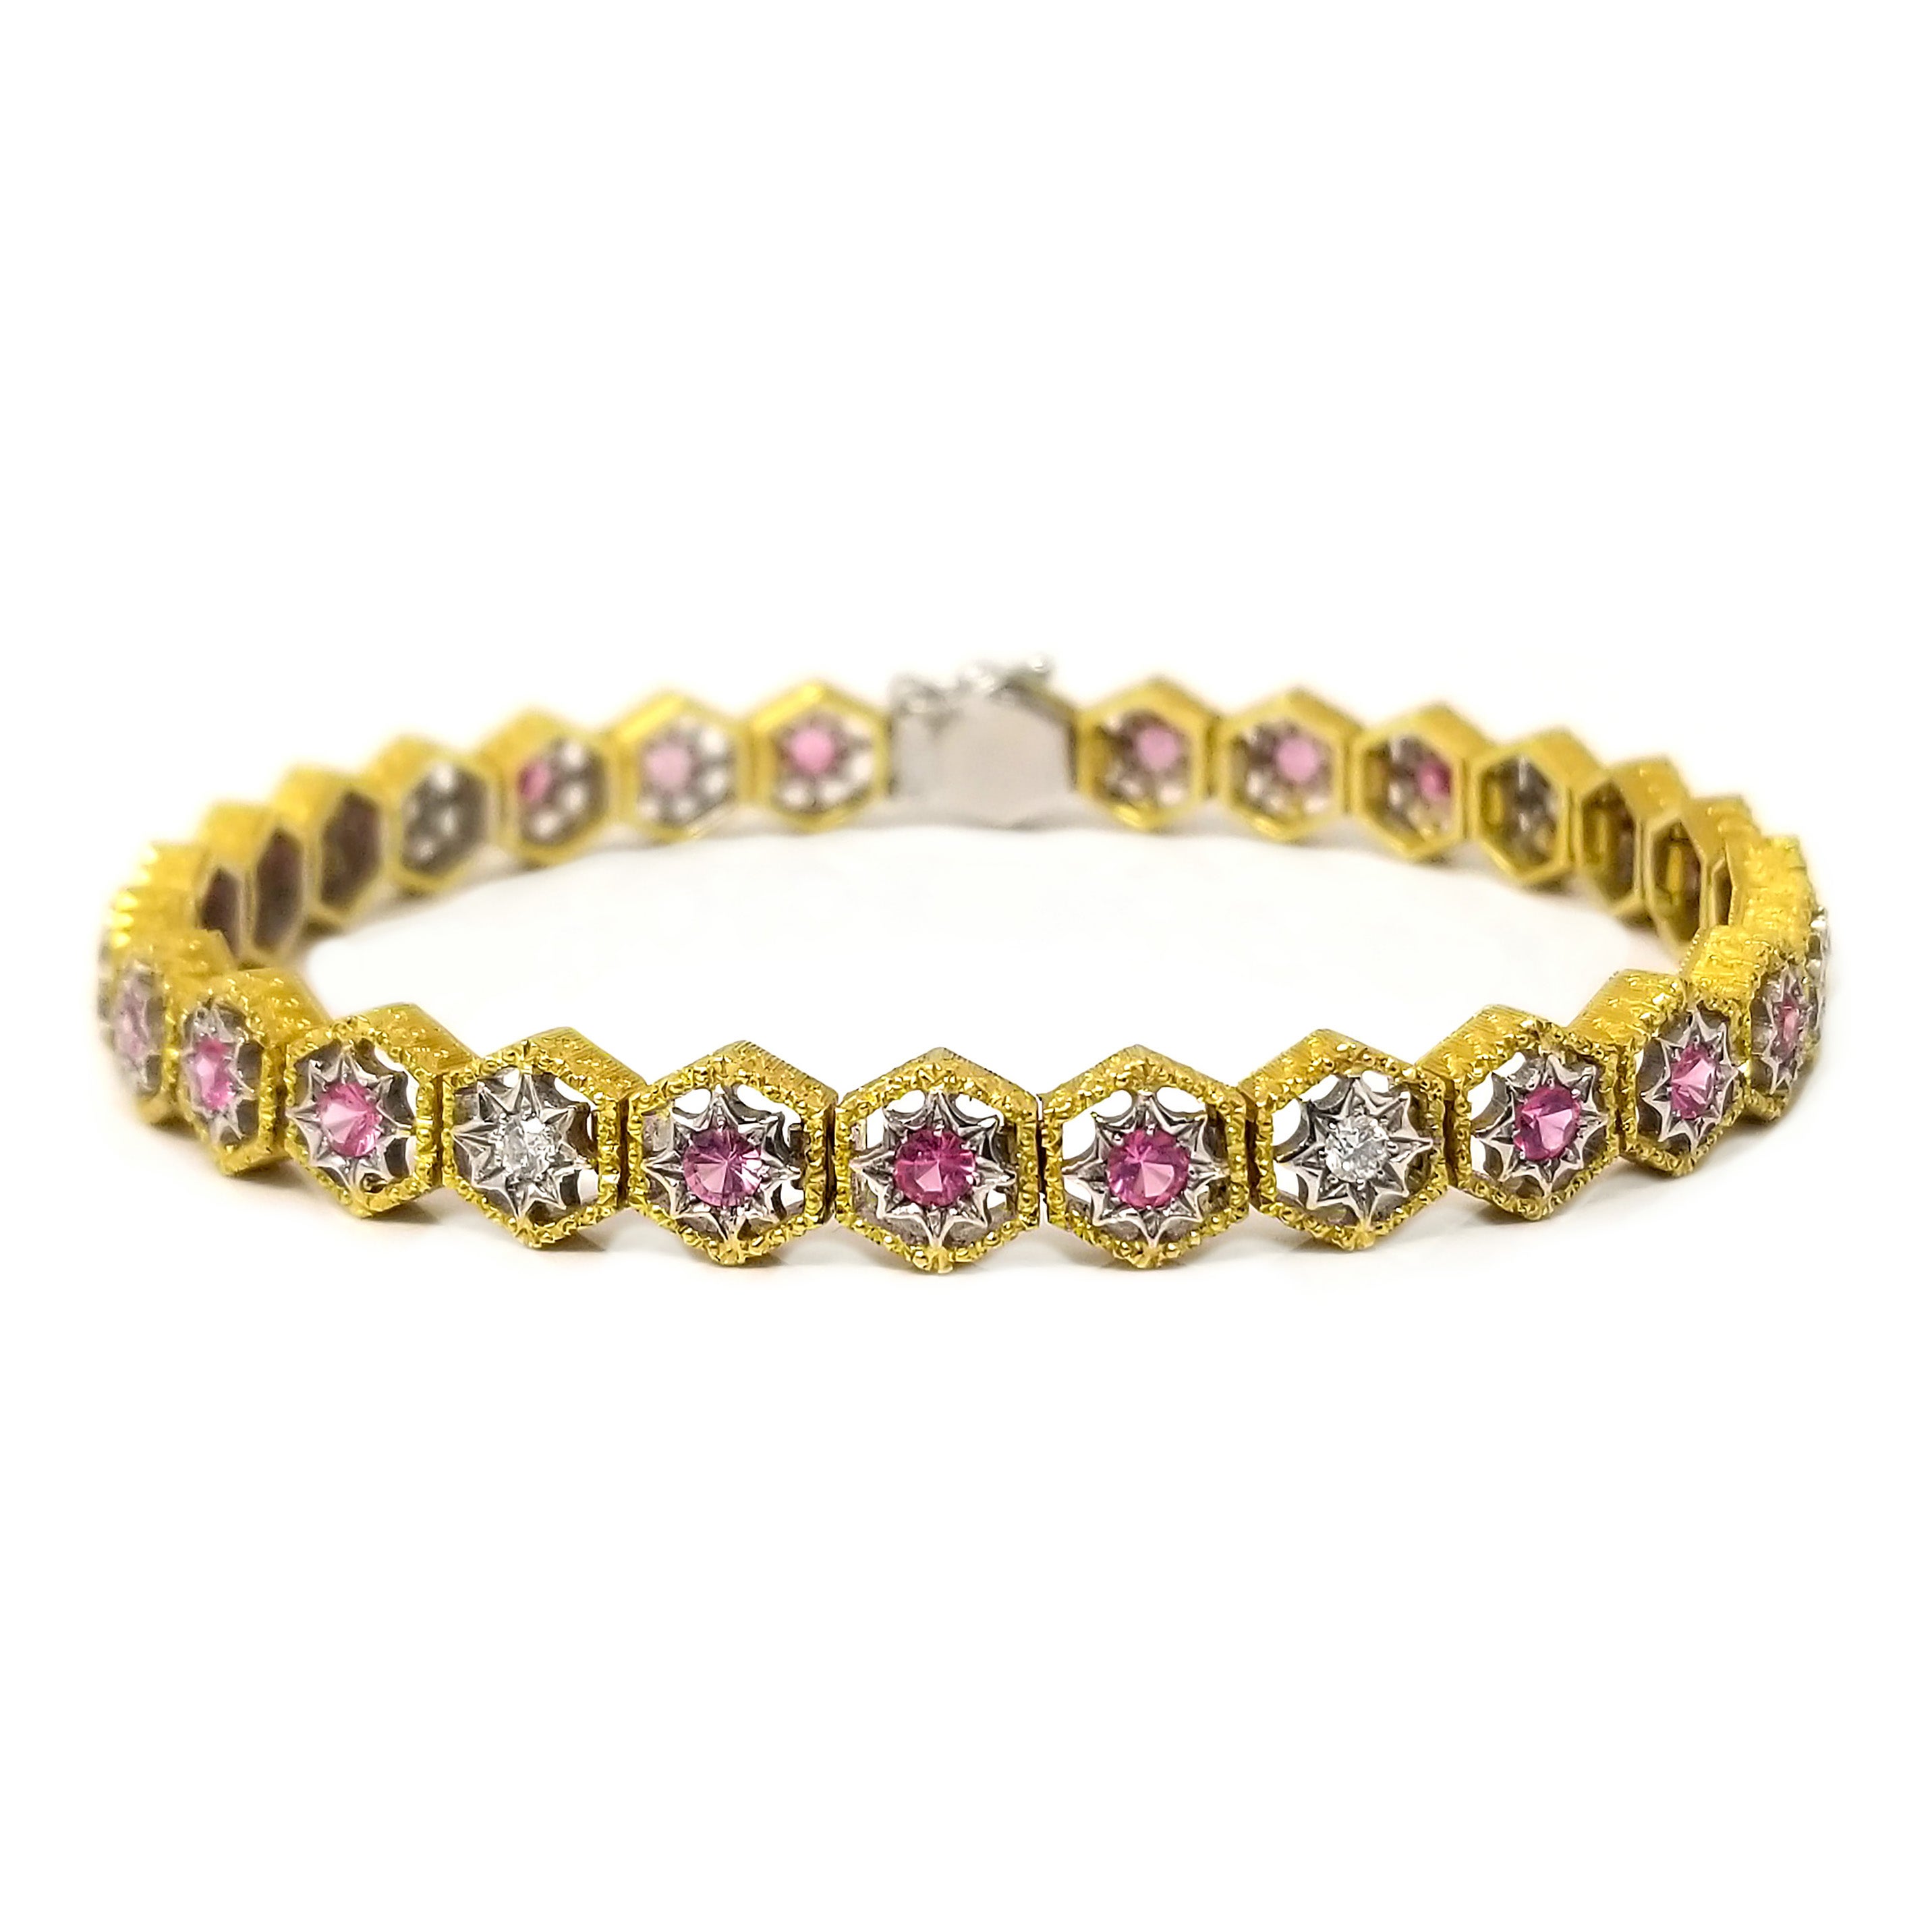 Mahenge Spinel, Diamond and 18kt Bracelet Made in Italy by Cynthia Scott Jewelry For Sale